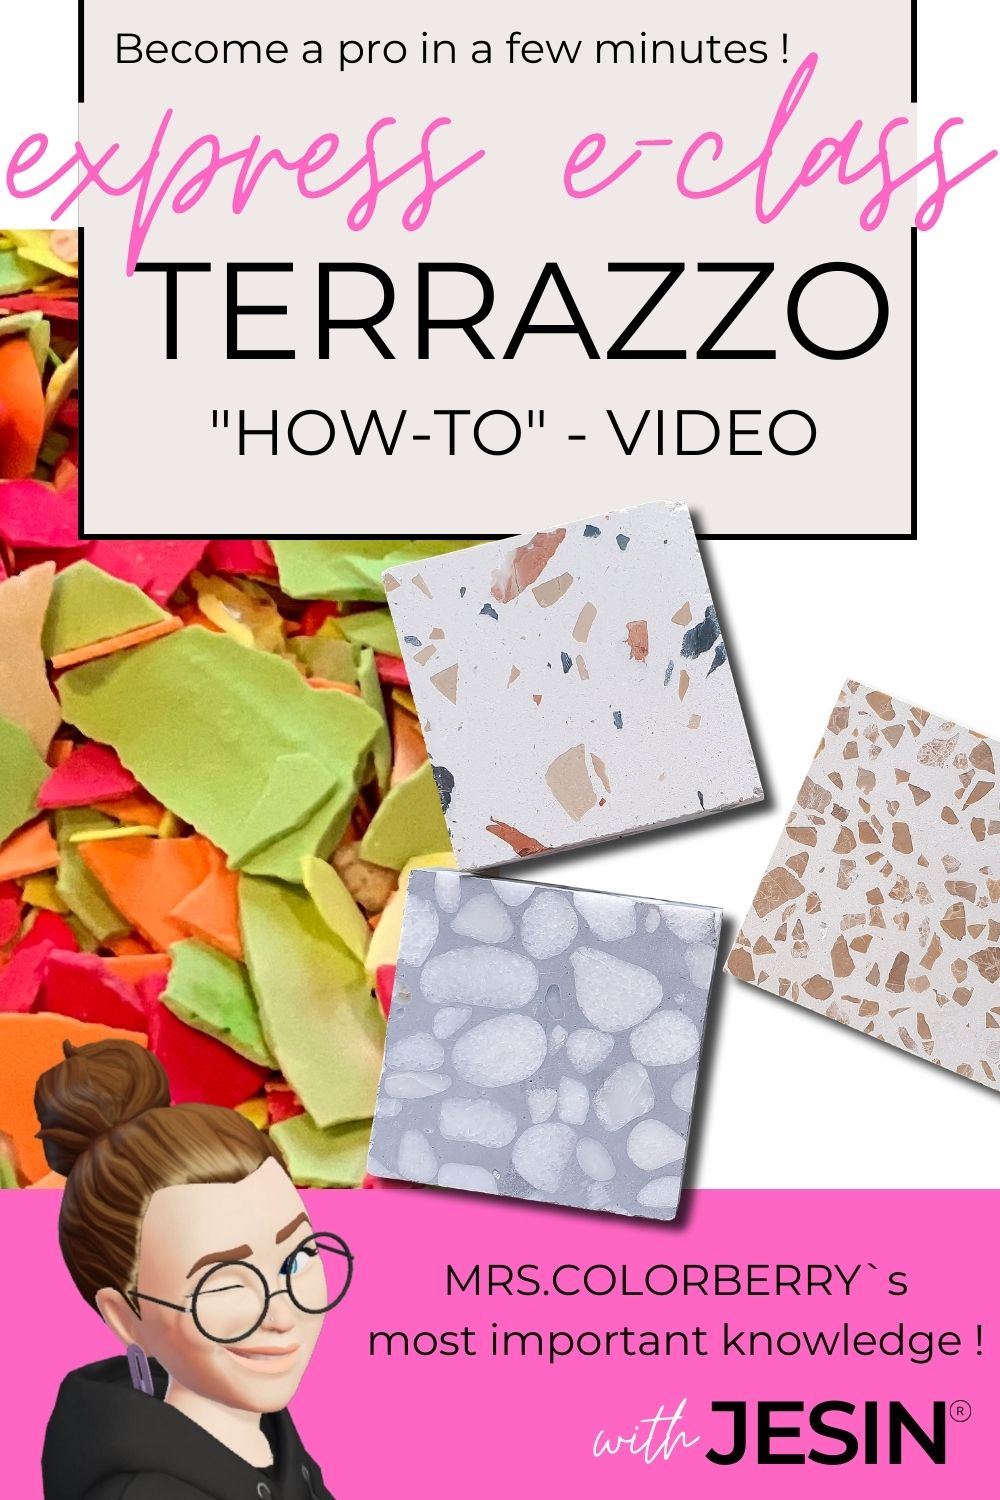 EXPRESS TICKET for TERRAZZO Looks